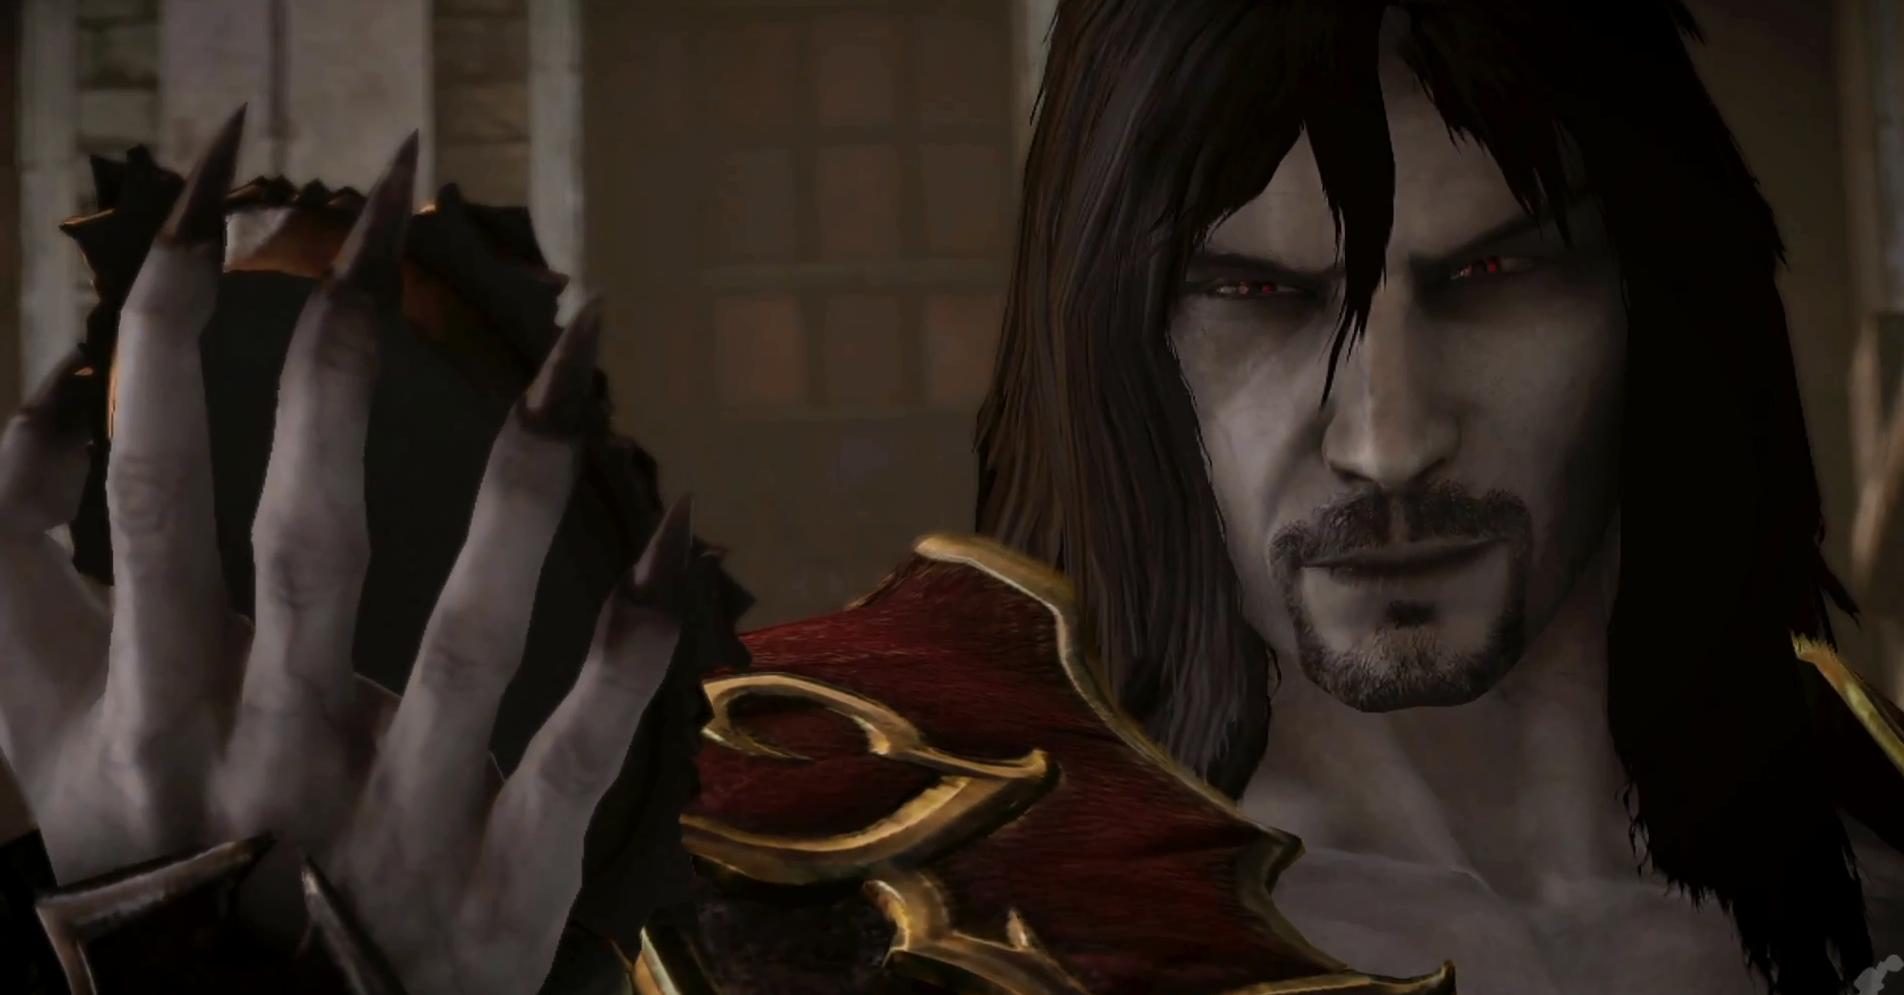 Castlevania: Lords of Shadows' Dracula Twist Is Spoiled by Lament of  Innocence